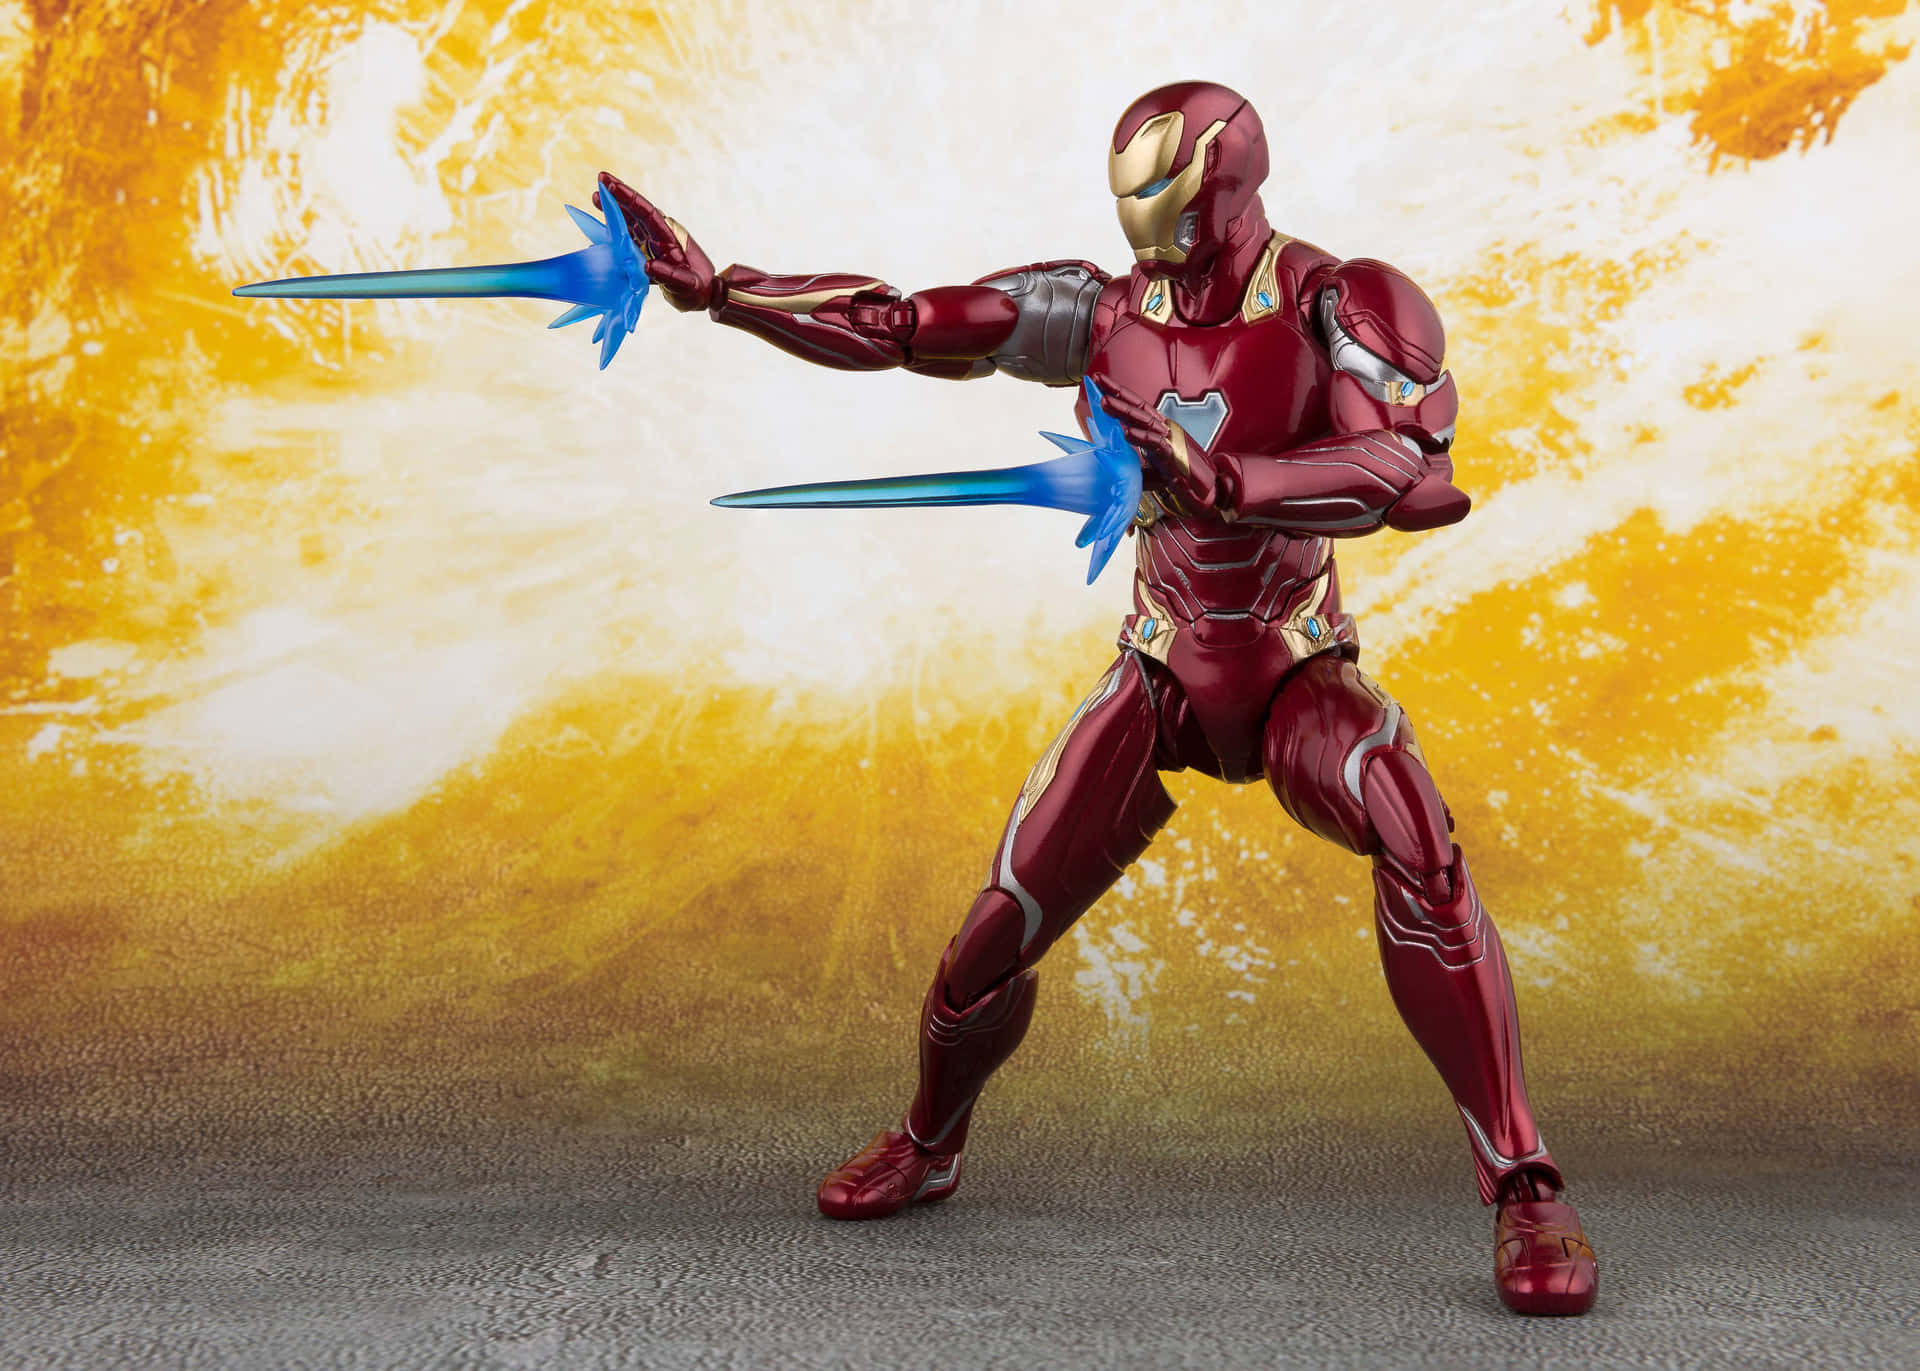 Protect your home with these awesome Iron Man Action Figures Wallpaper